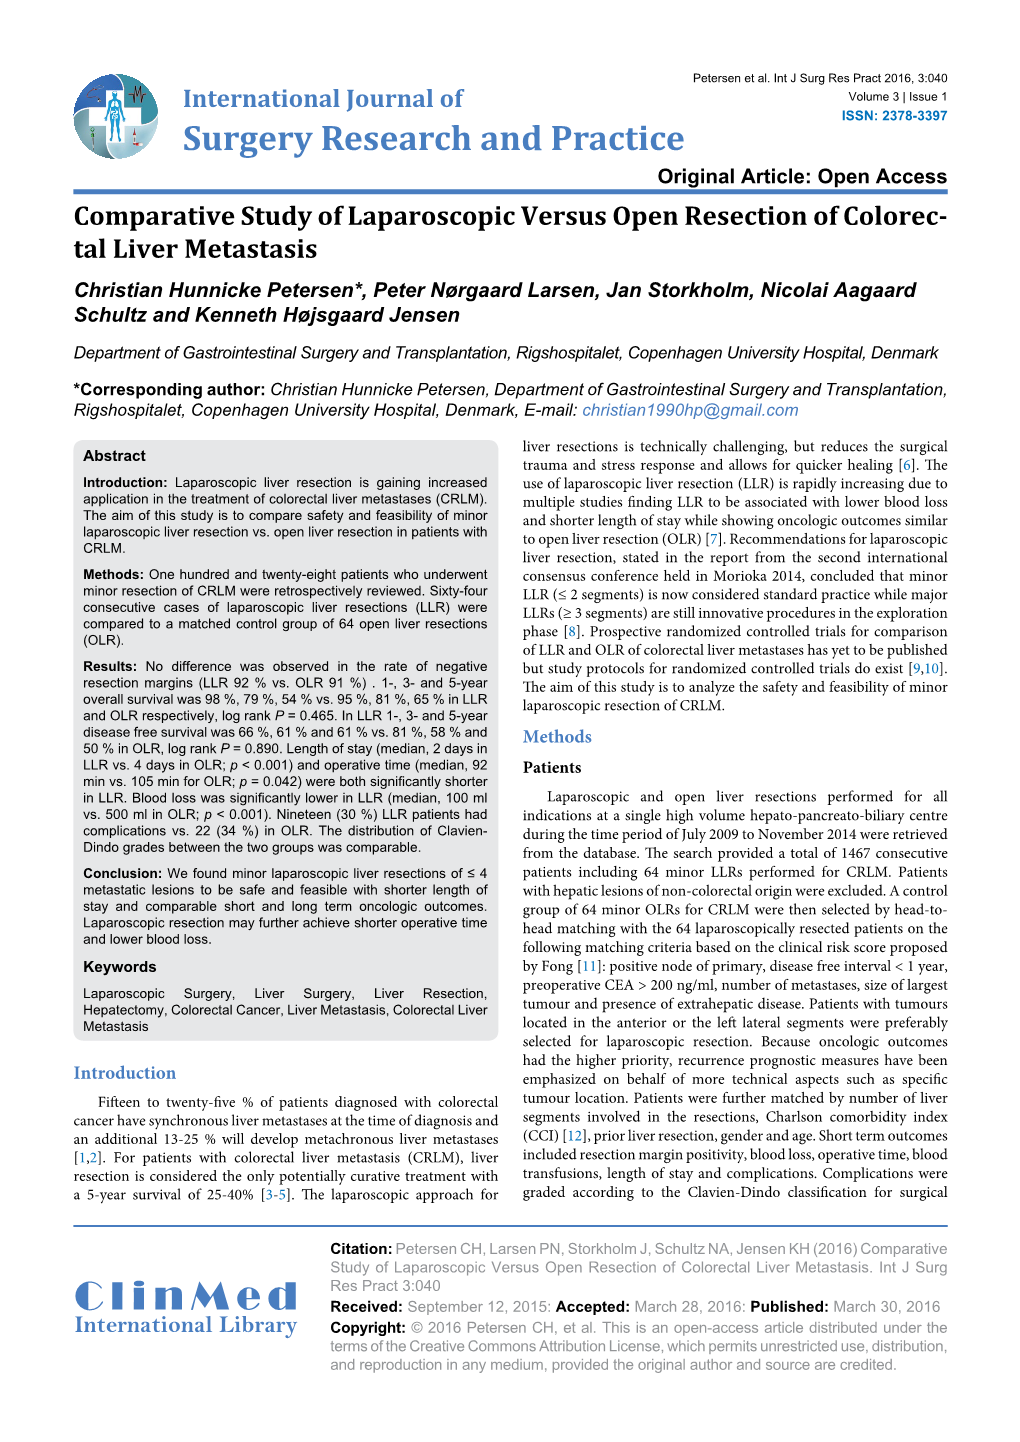 Comparative Study of Laparoscopic Versus Open Resection Of